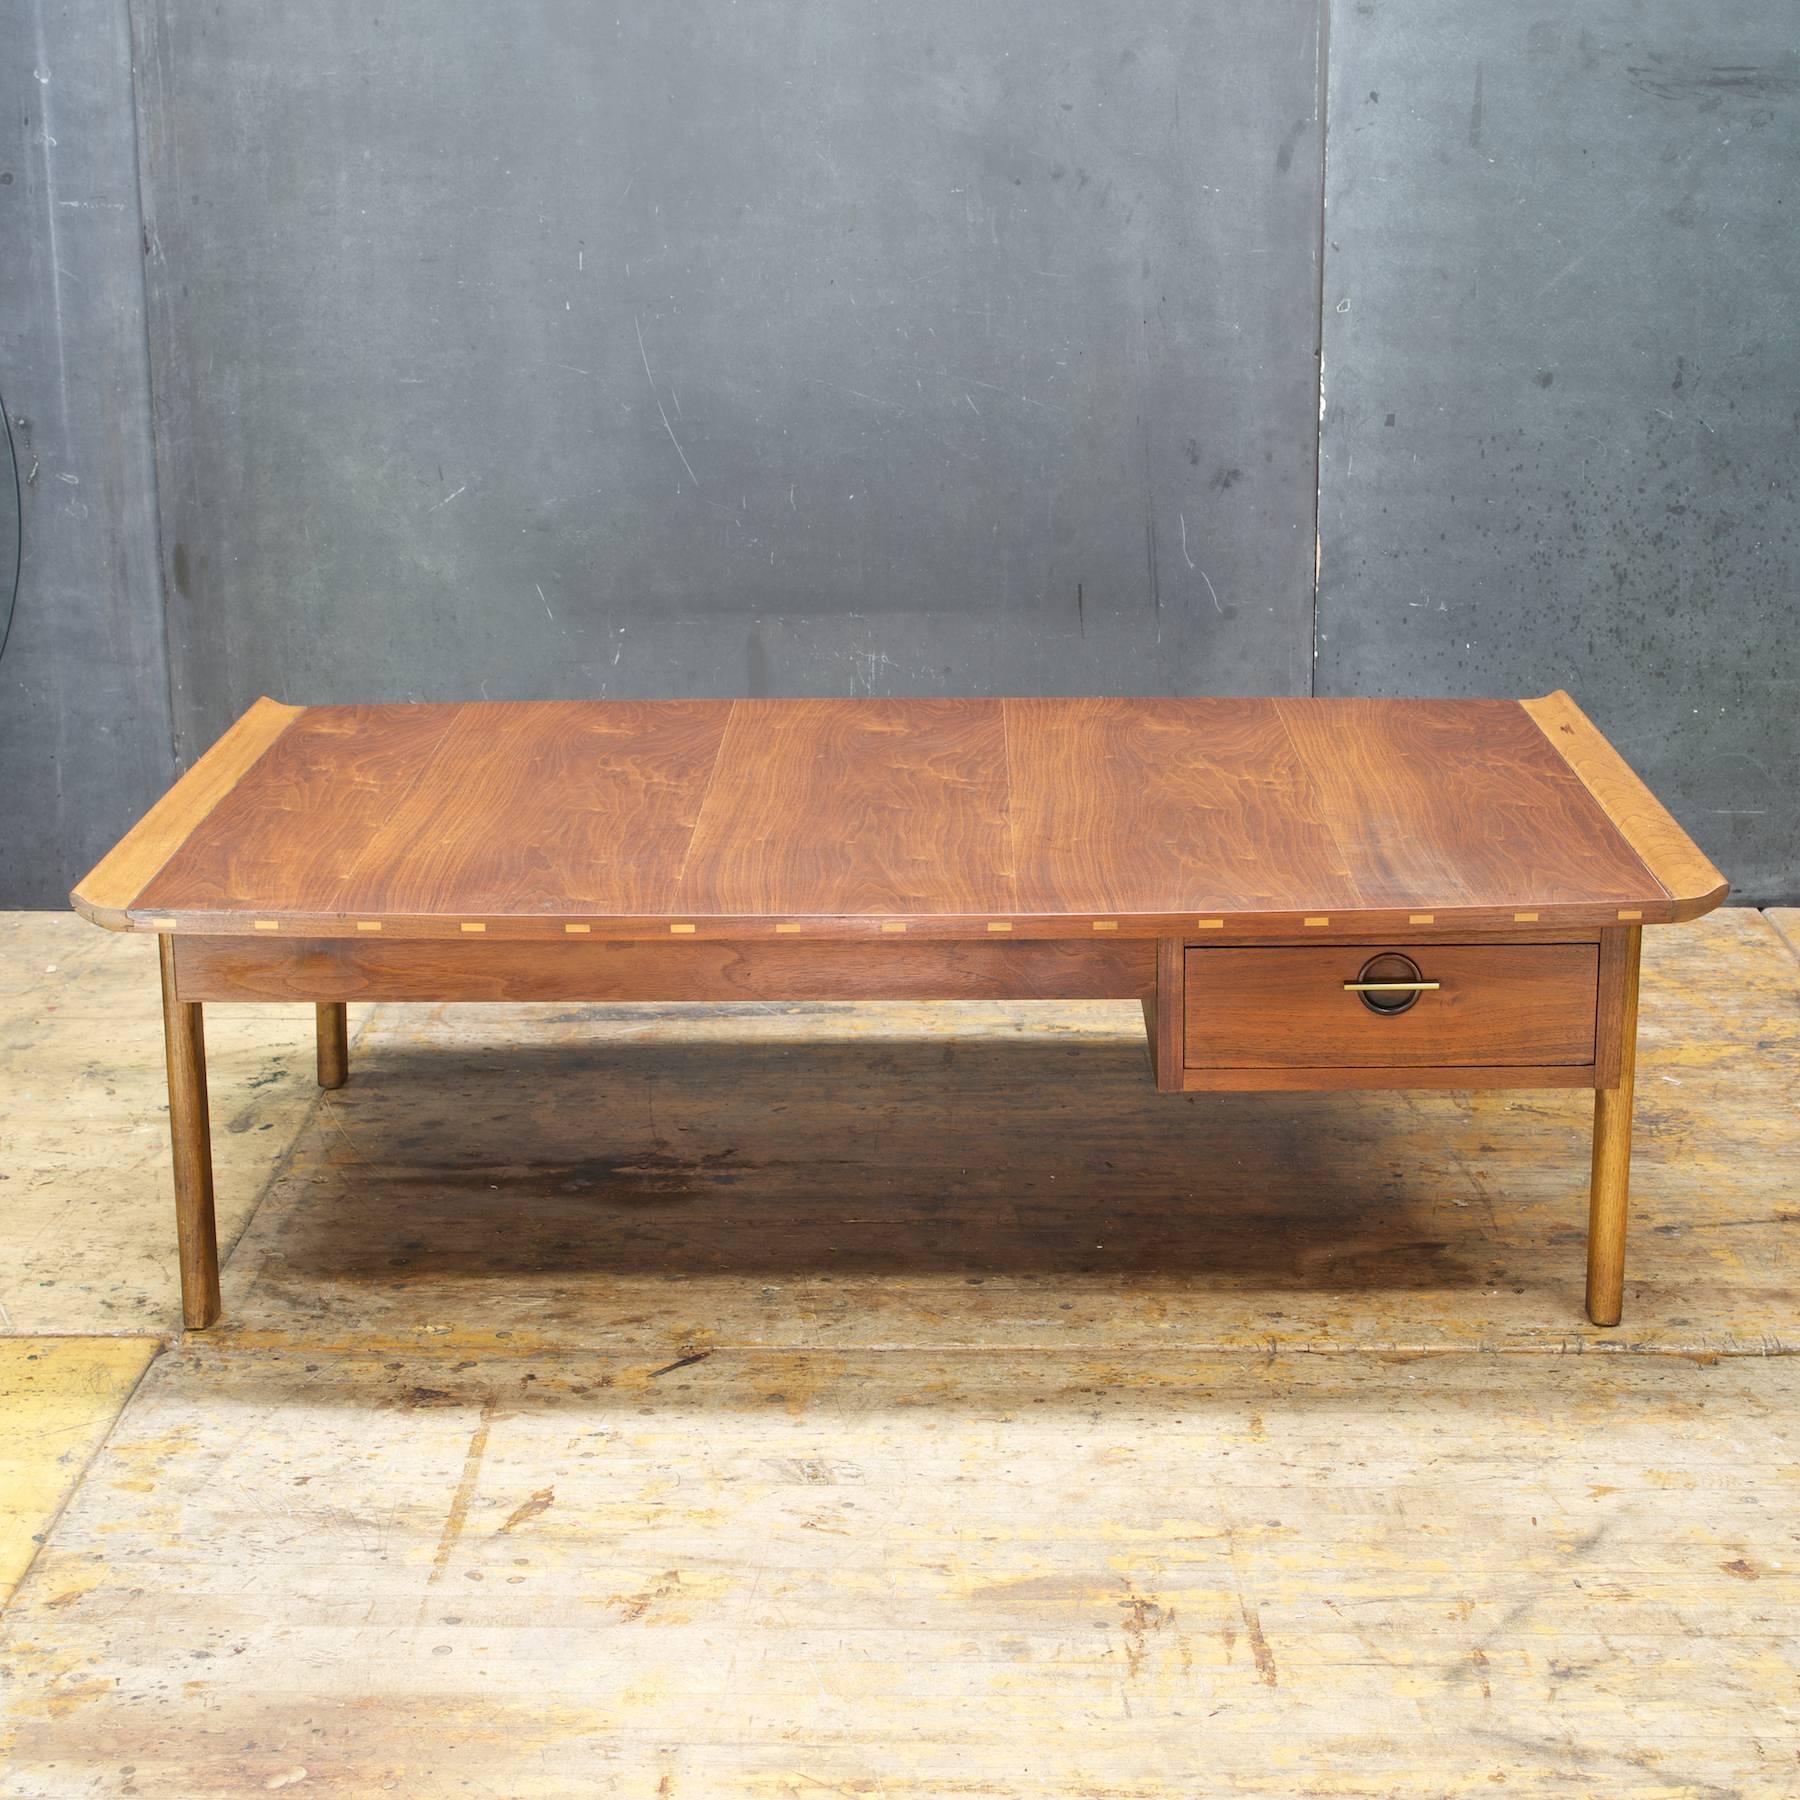 Veneer Asian Styled Mid-Century Modern Flairing and Bowed Coffee Table